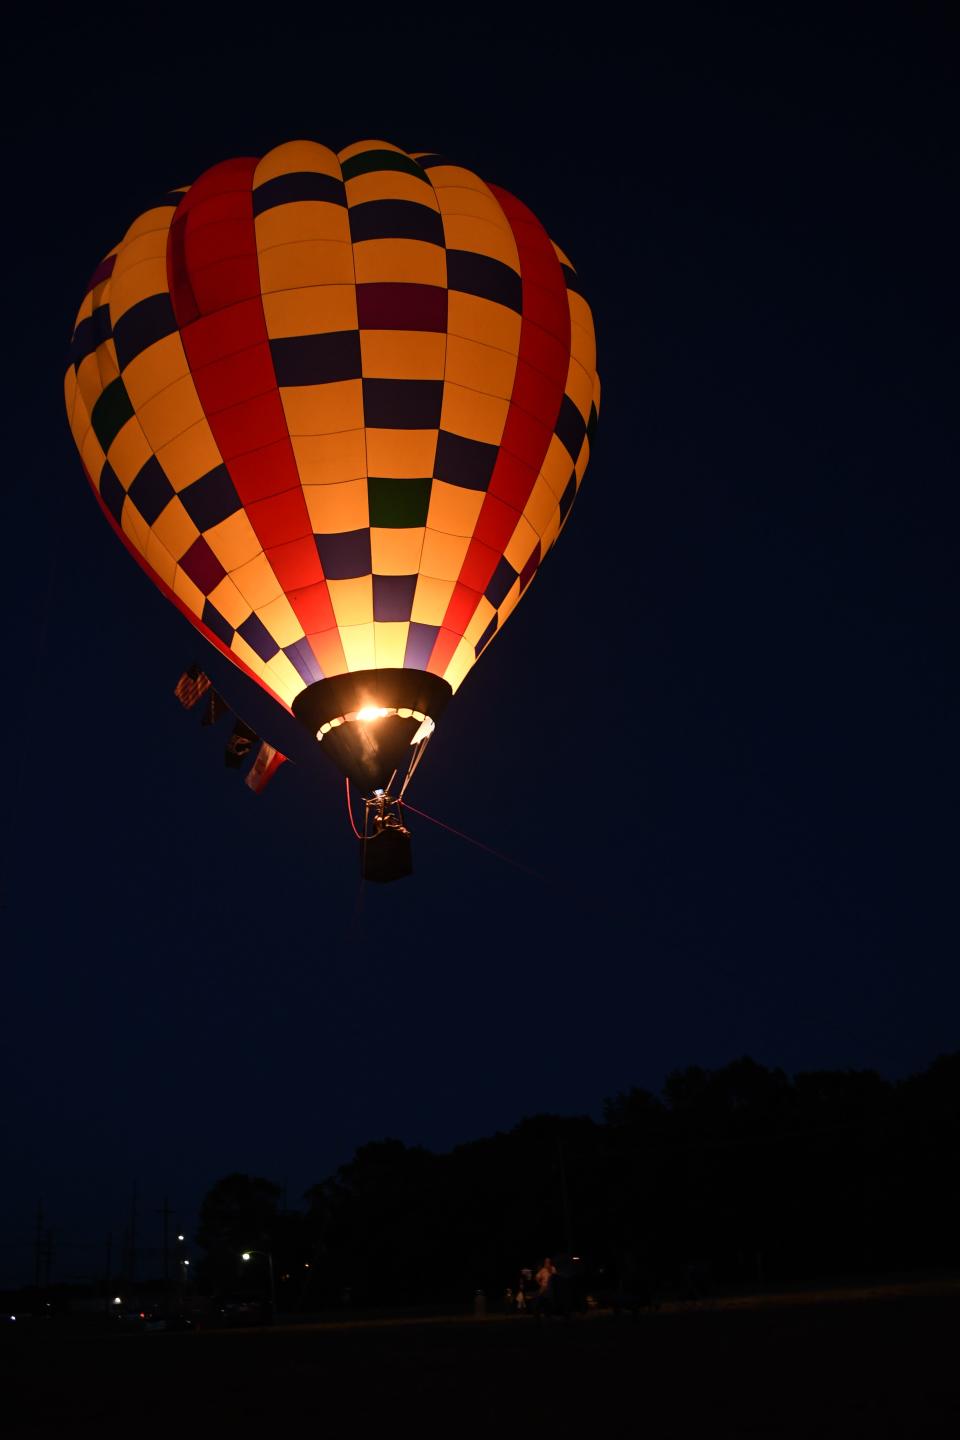 Hot air balloon pilot Bob Pulaski lights up the balloon as it floats up. Pulaski brought his balloon, the Ski Lift, and set up in the field next to Huckleberry Brewing Company Saturday night offering balloon rides for $10.